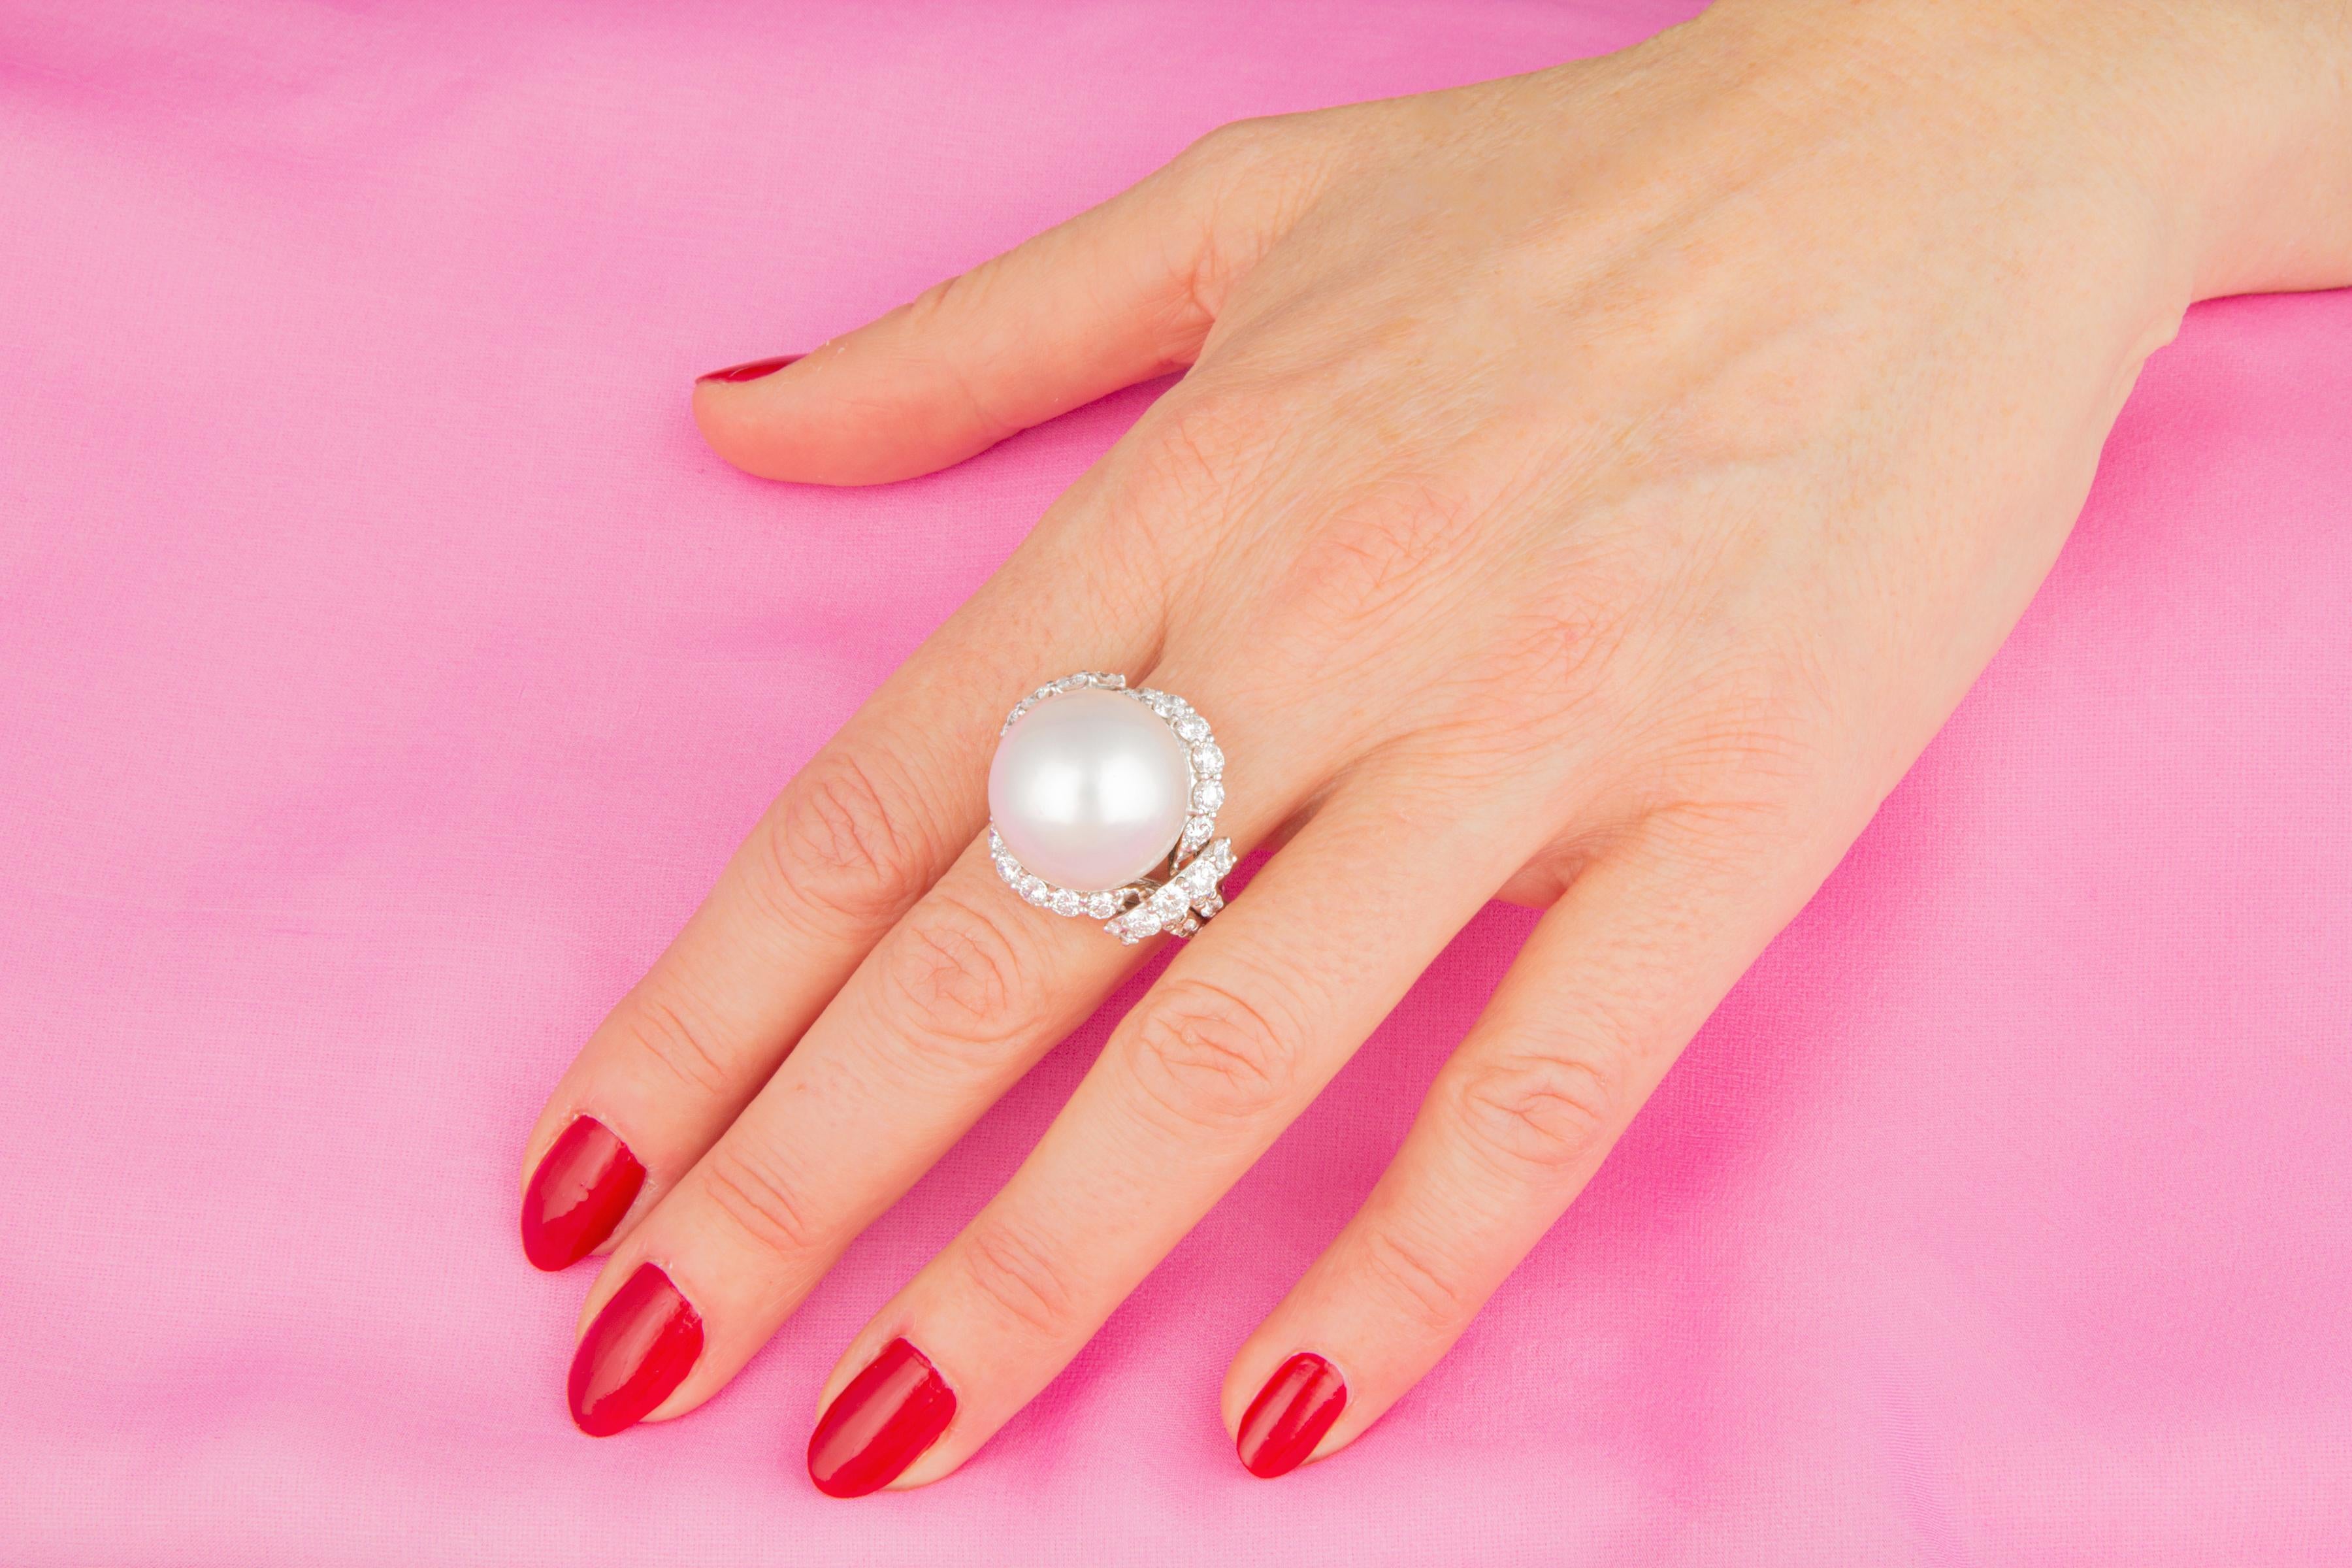 This South Sea pearl and diamond cocktail ring features a top quality pearl of 18.50mm diameter. The pearl is untreated. It displays a splendid nacre and its natural color and luster have not been enhanced in any way. The pearl is perched atop a